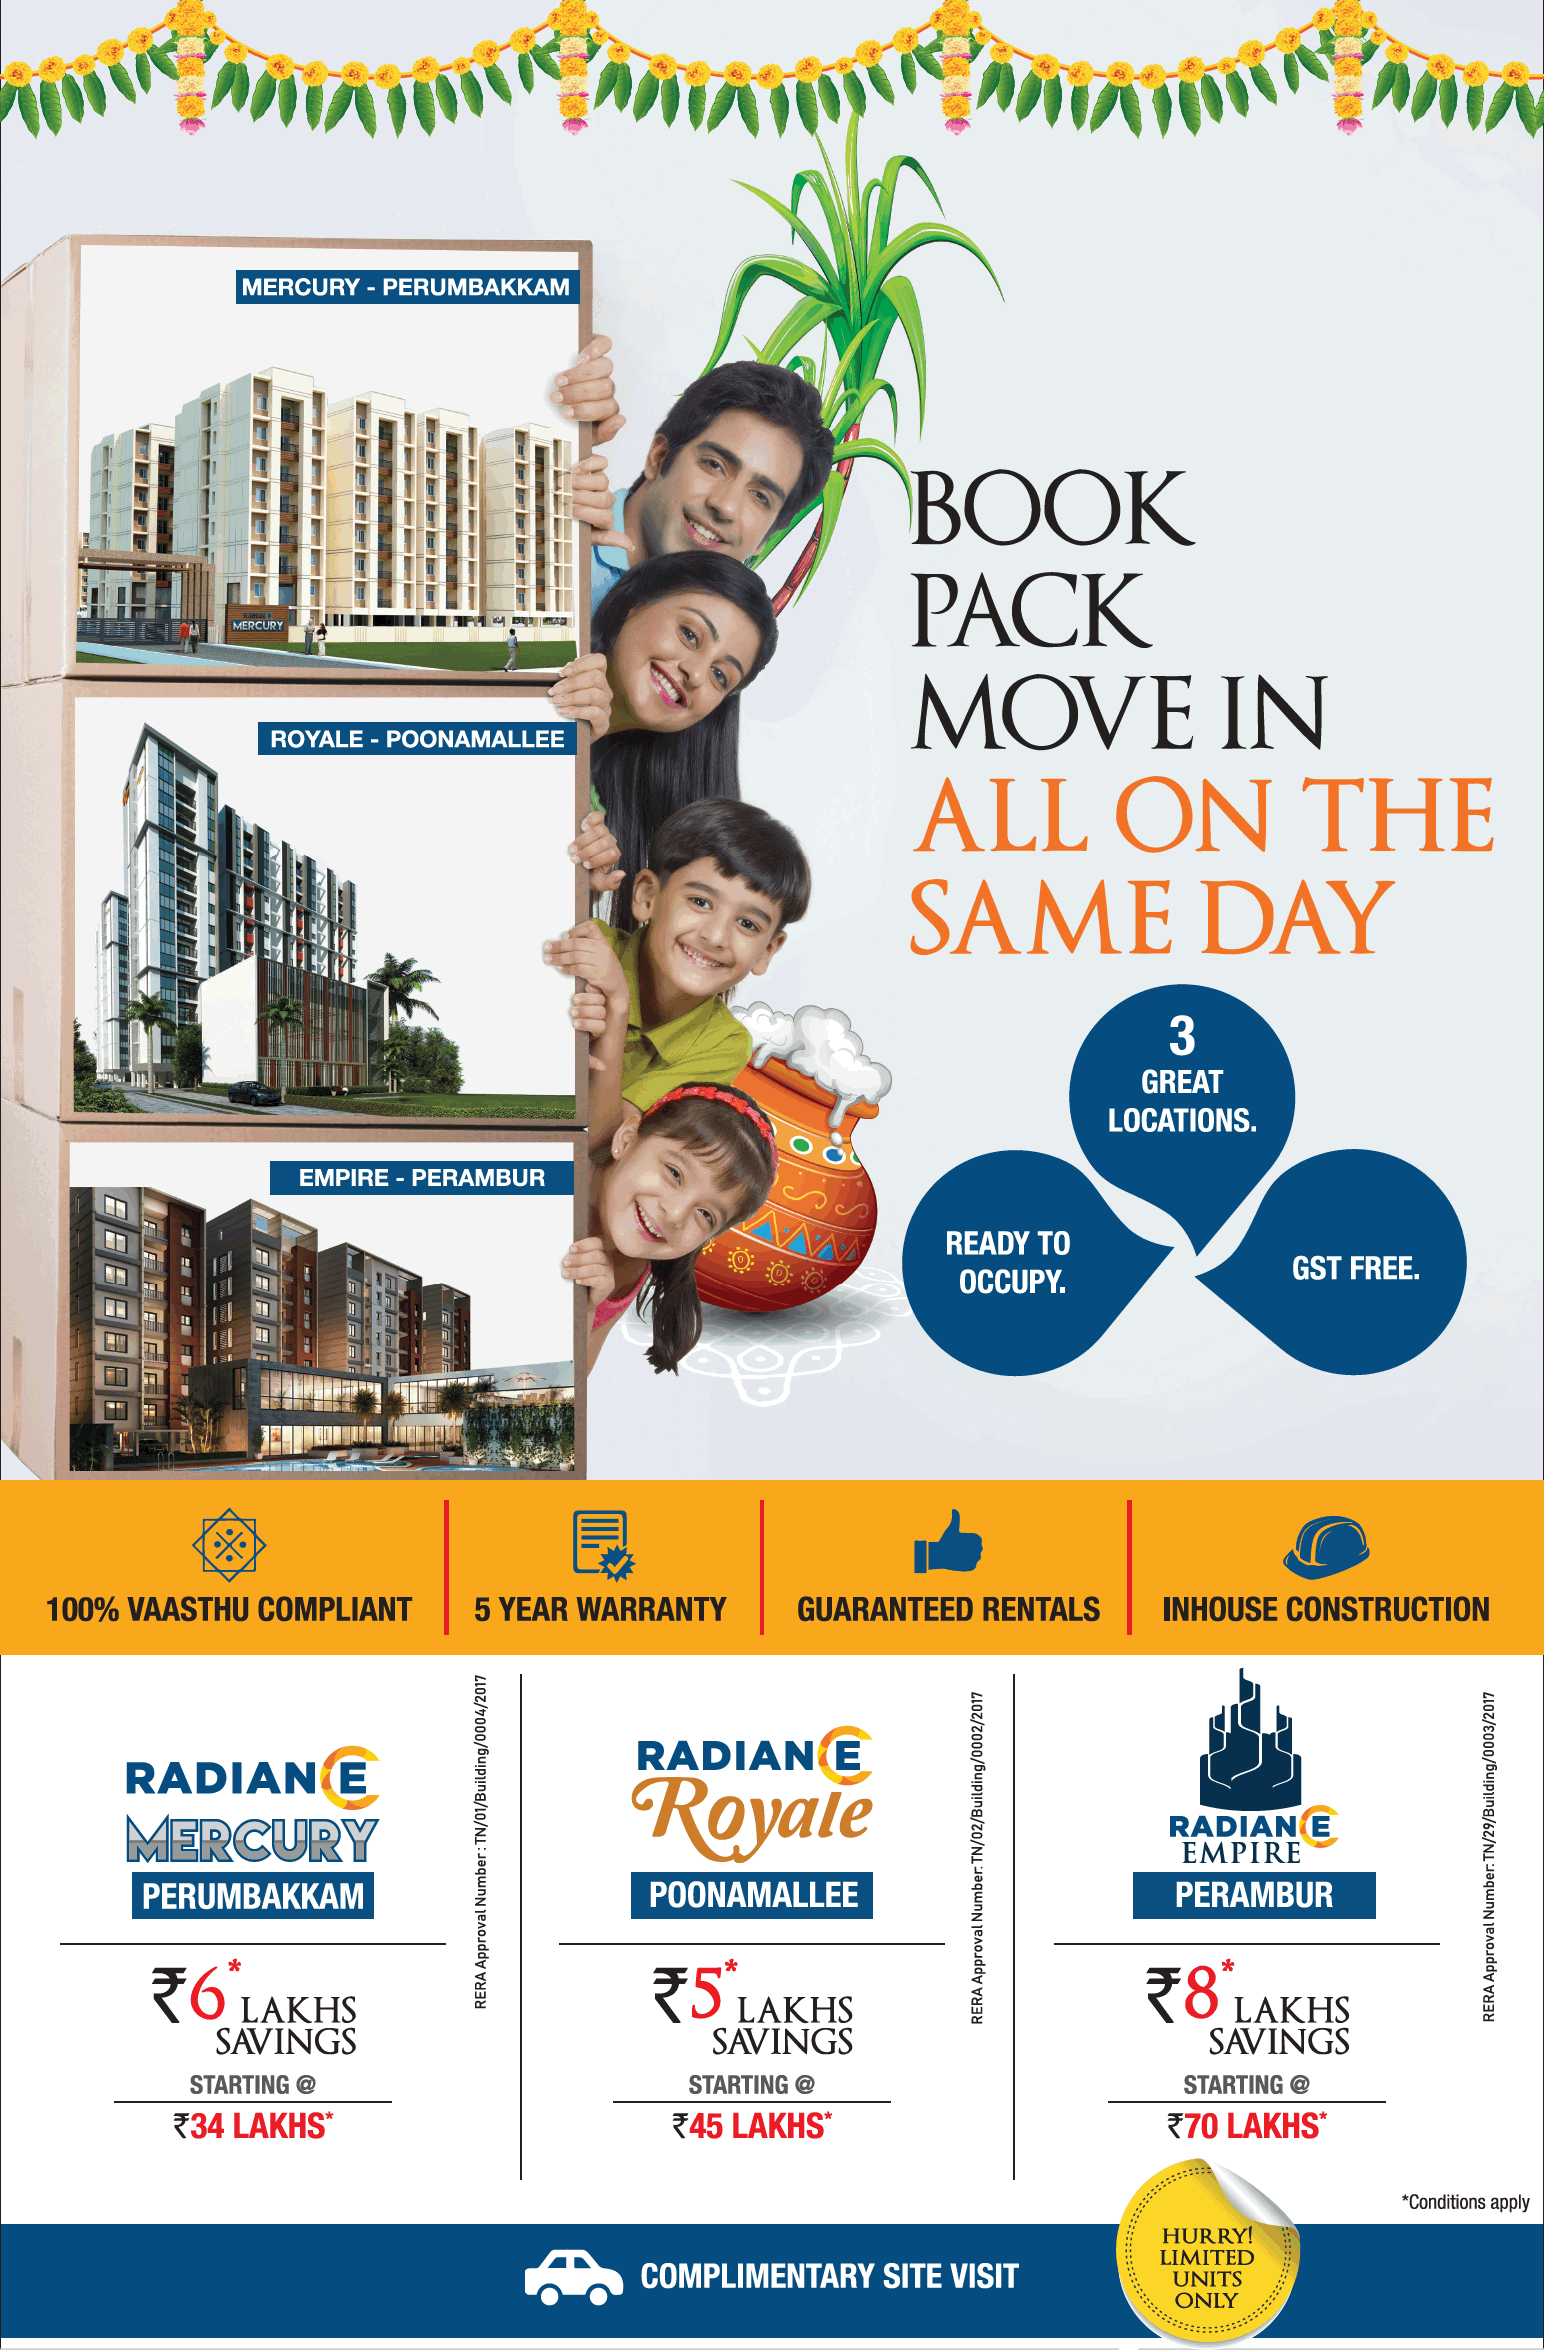 Ready to occupy apartments at Radiance Projects in Chennai